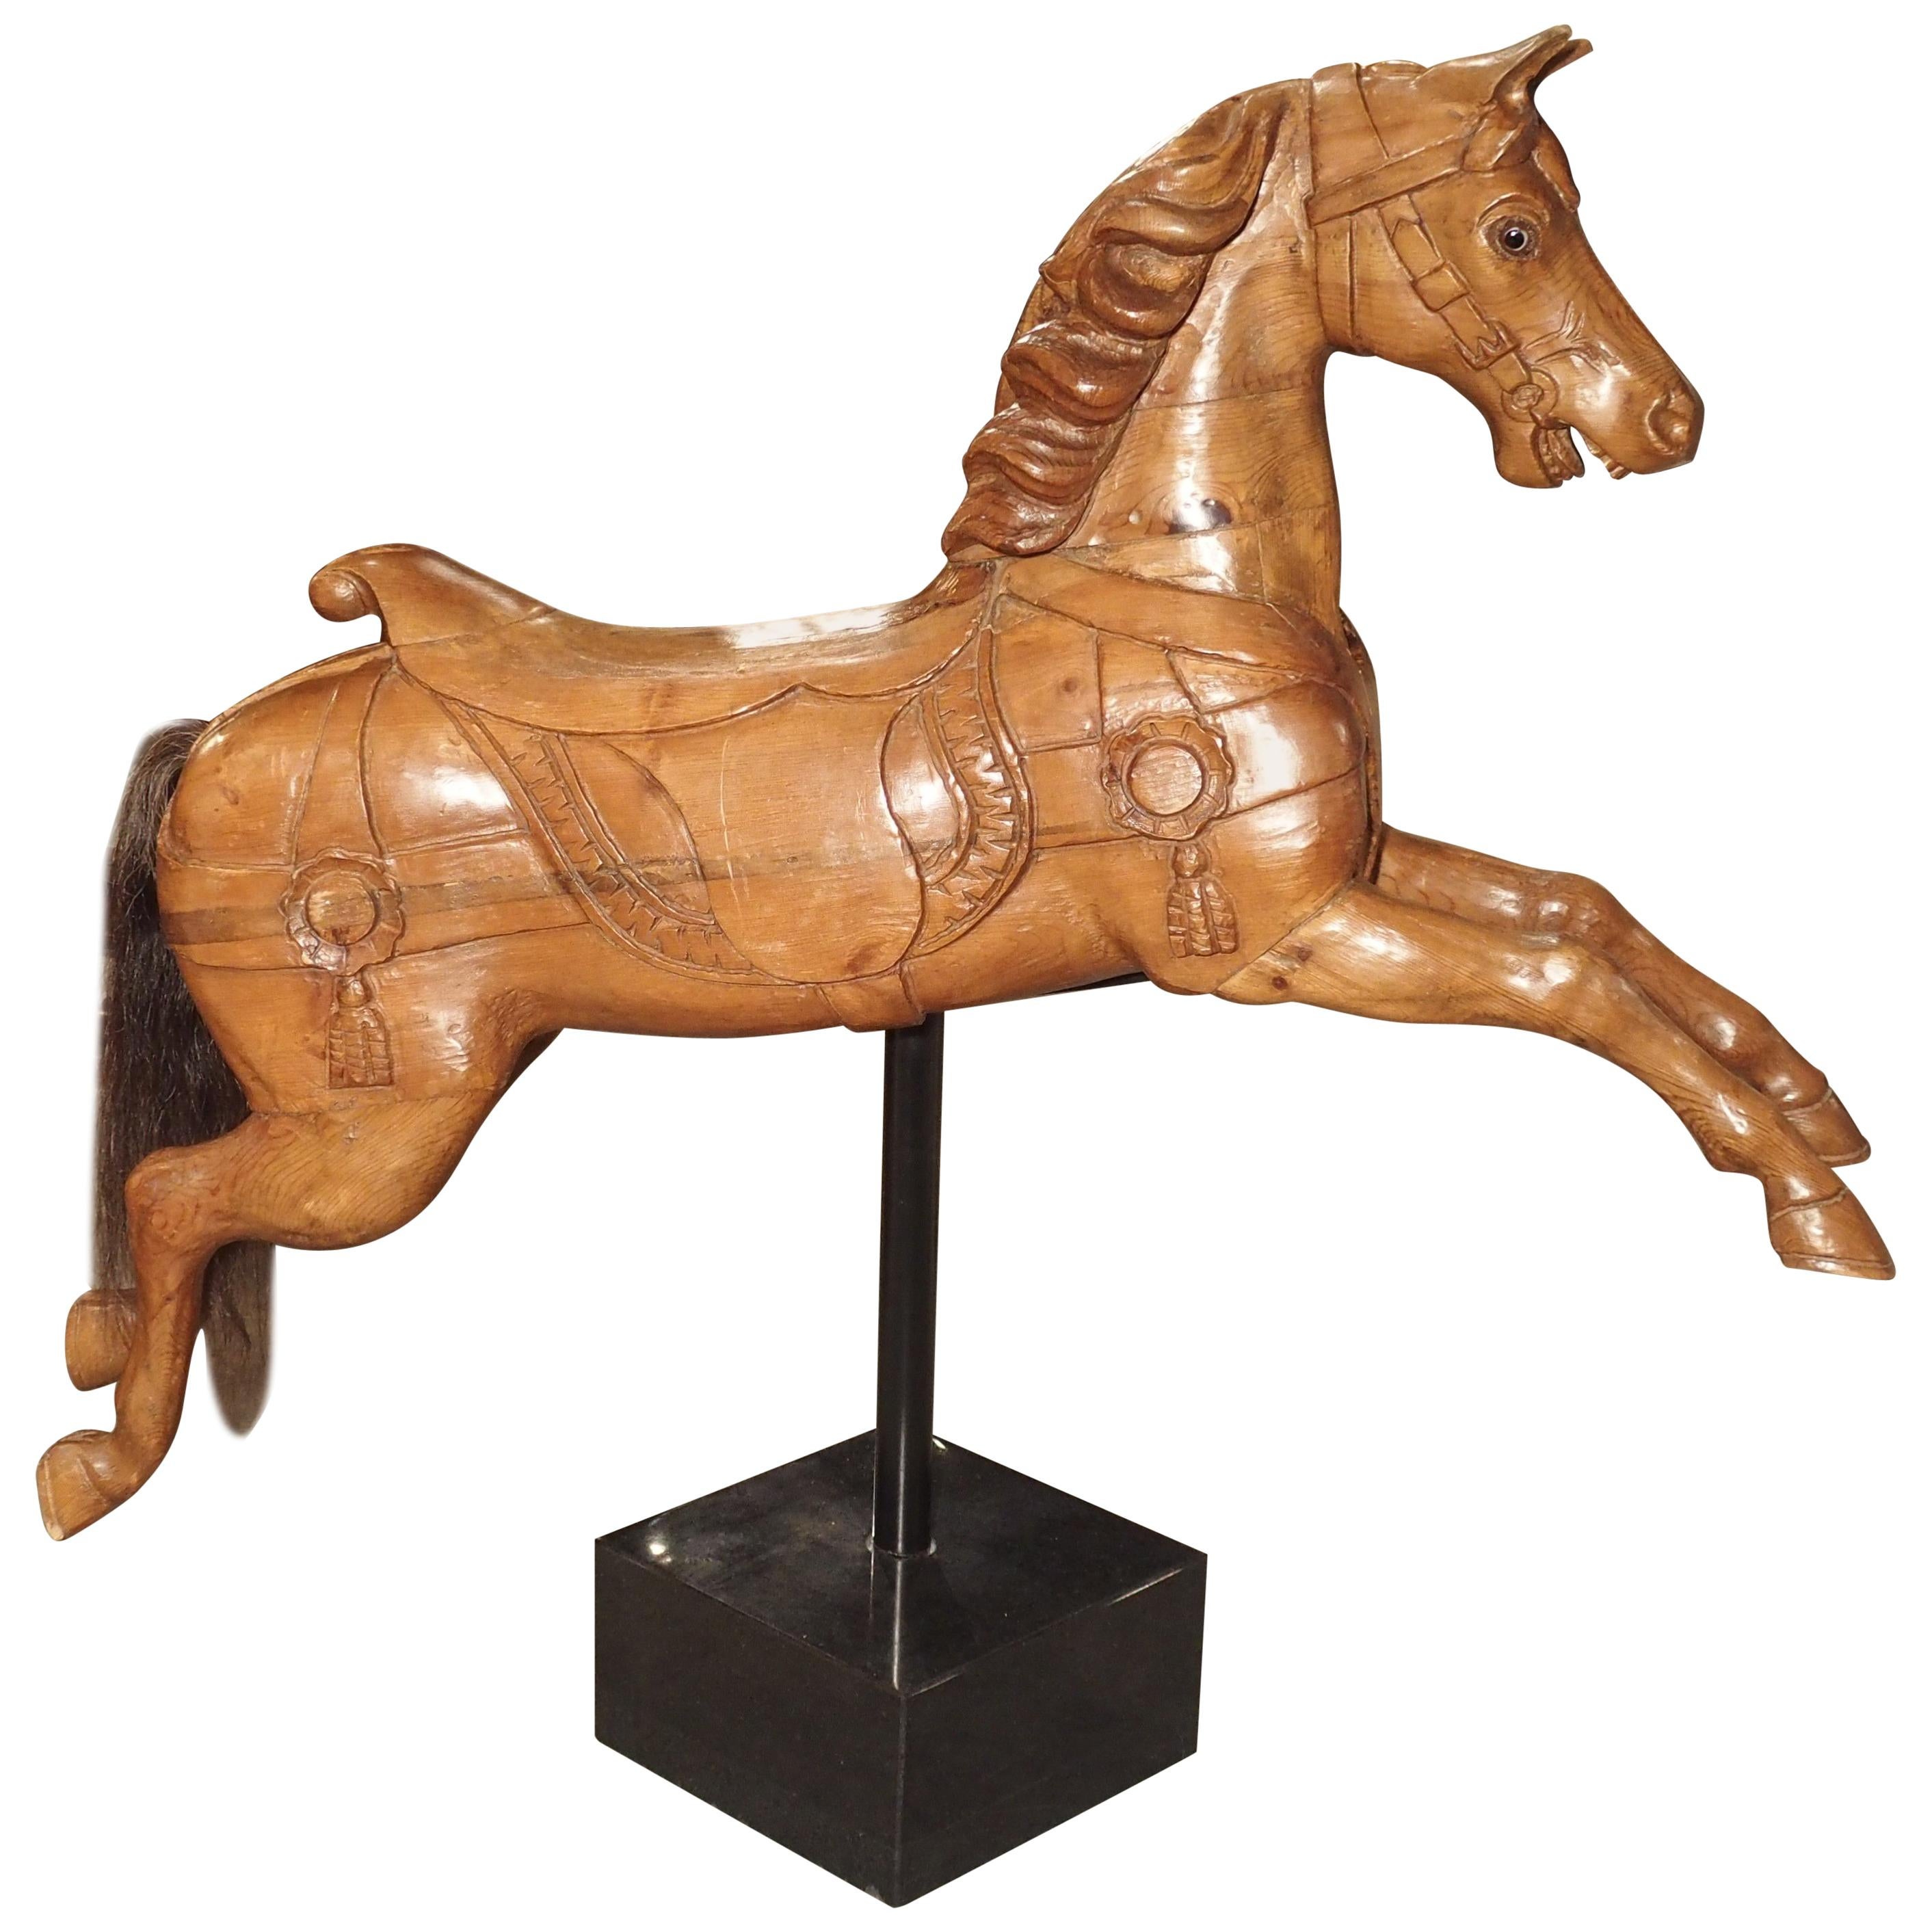 Wooden Jumping Horse on Stand from Barcelona Spain, circa 1900